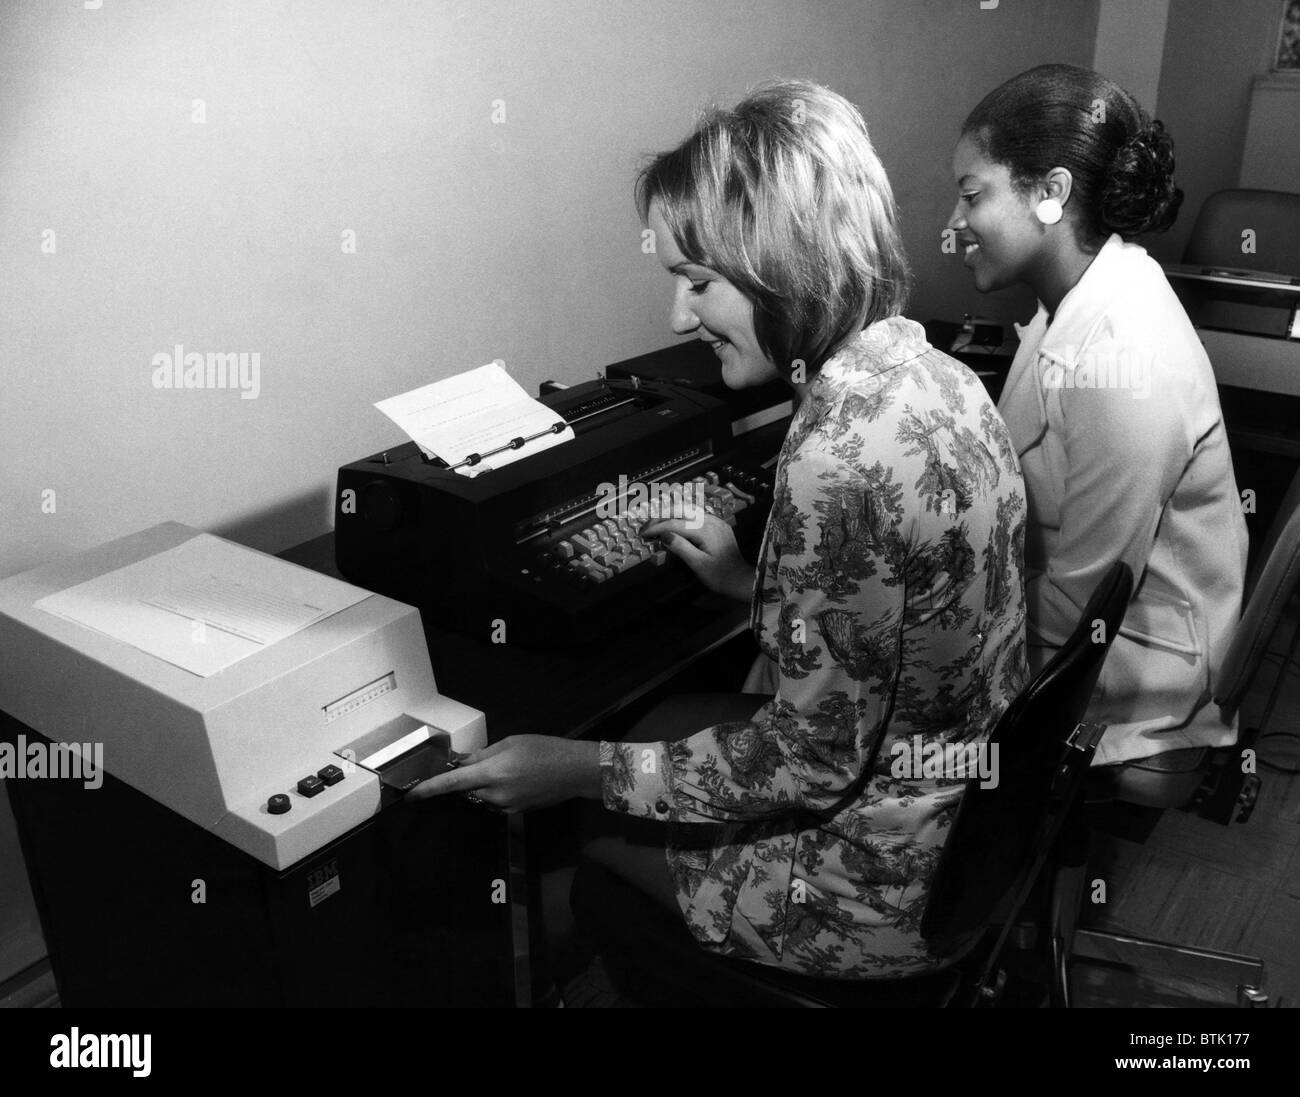 An American typewriter, known as the Magnetic Card Selectric Typewriter, circa 1970s. CSU Archives/Courtesy Everett Collection Stock Photo